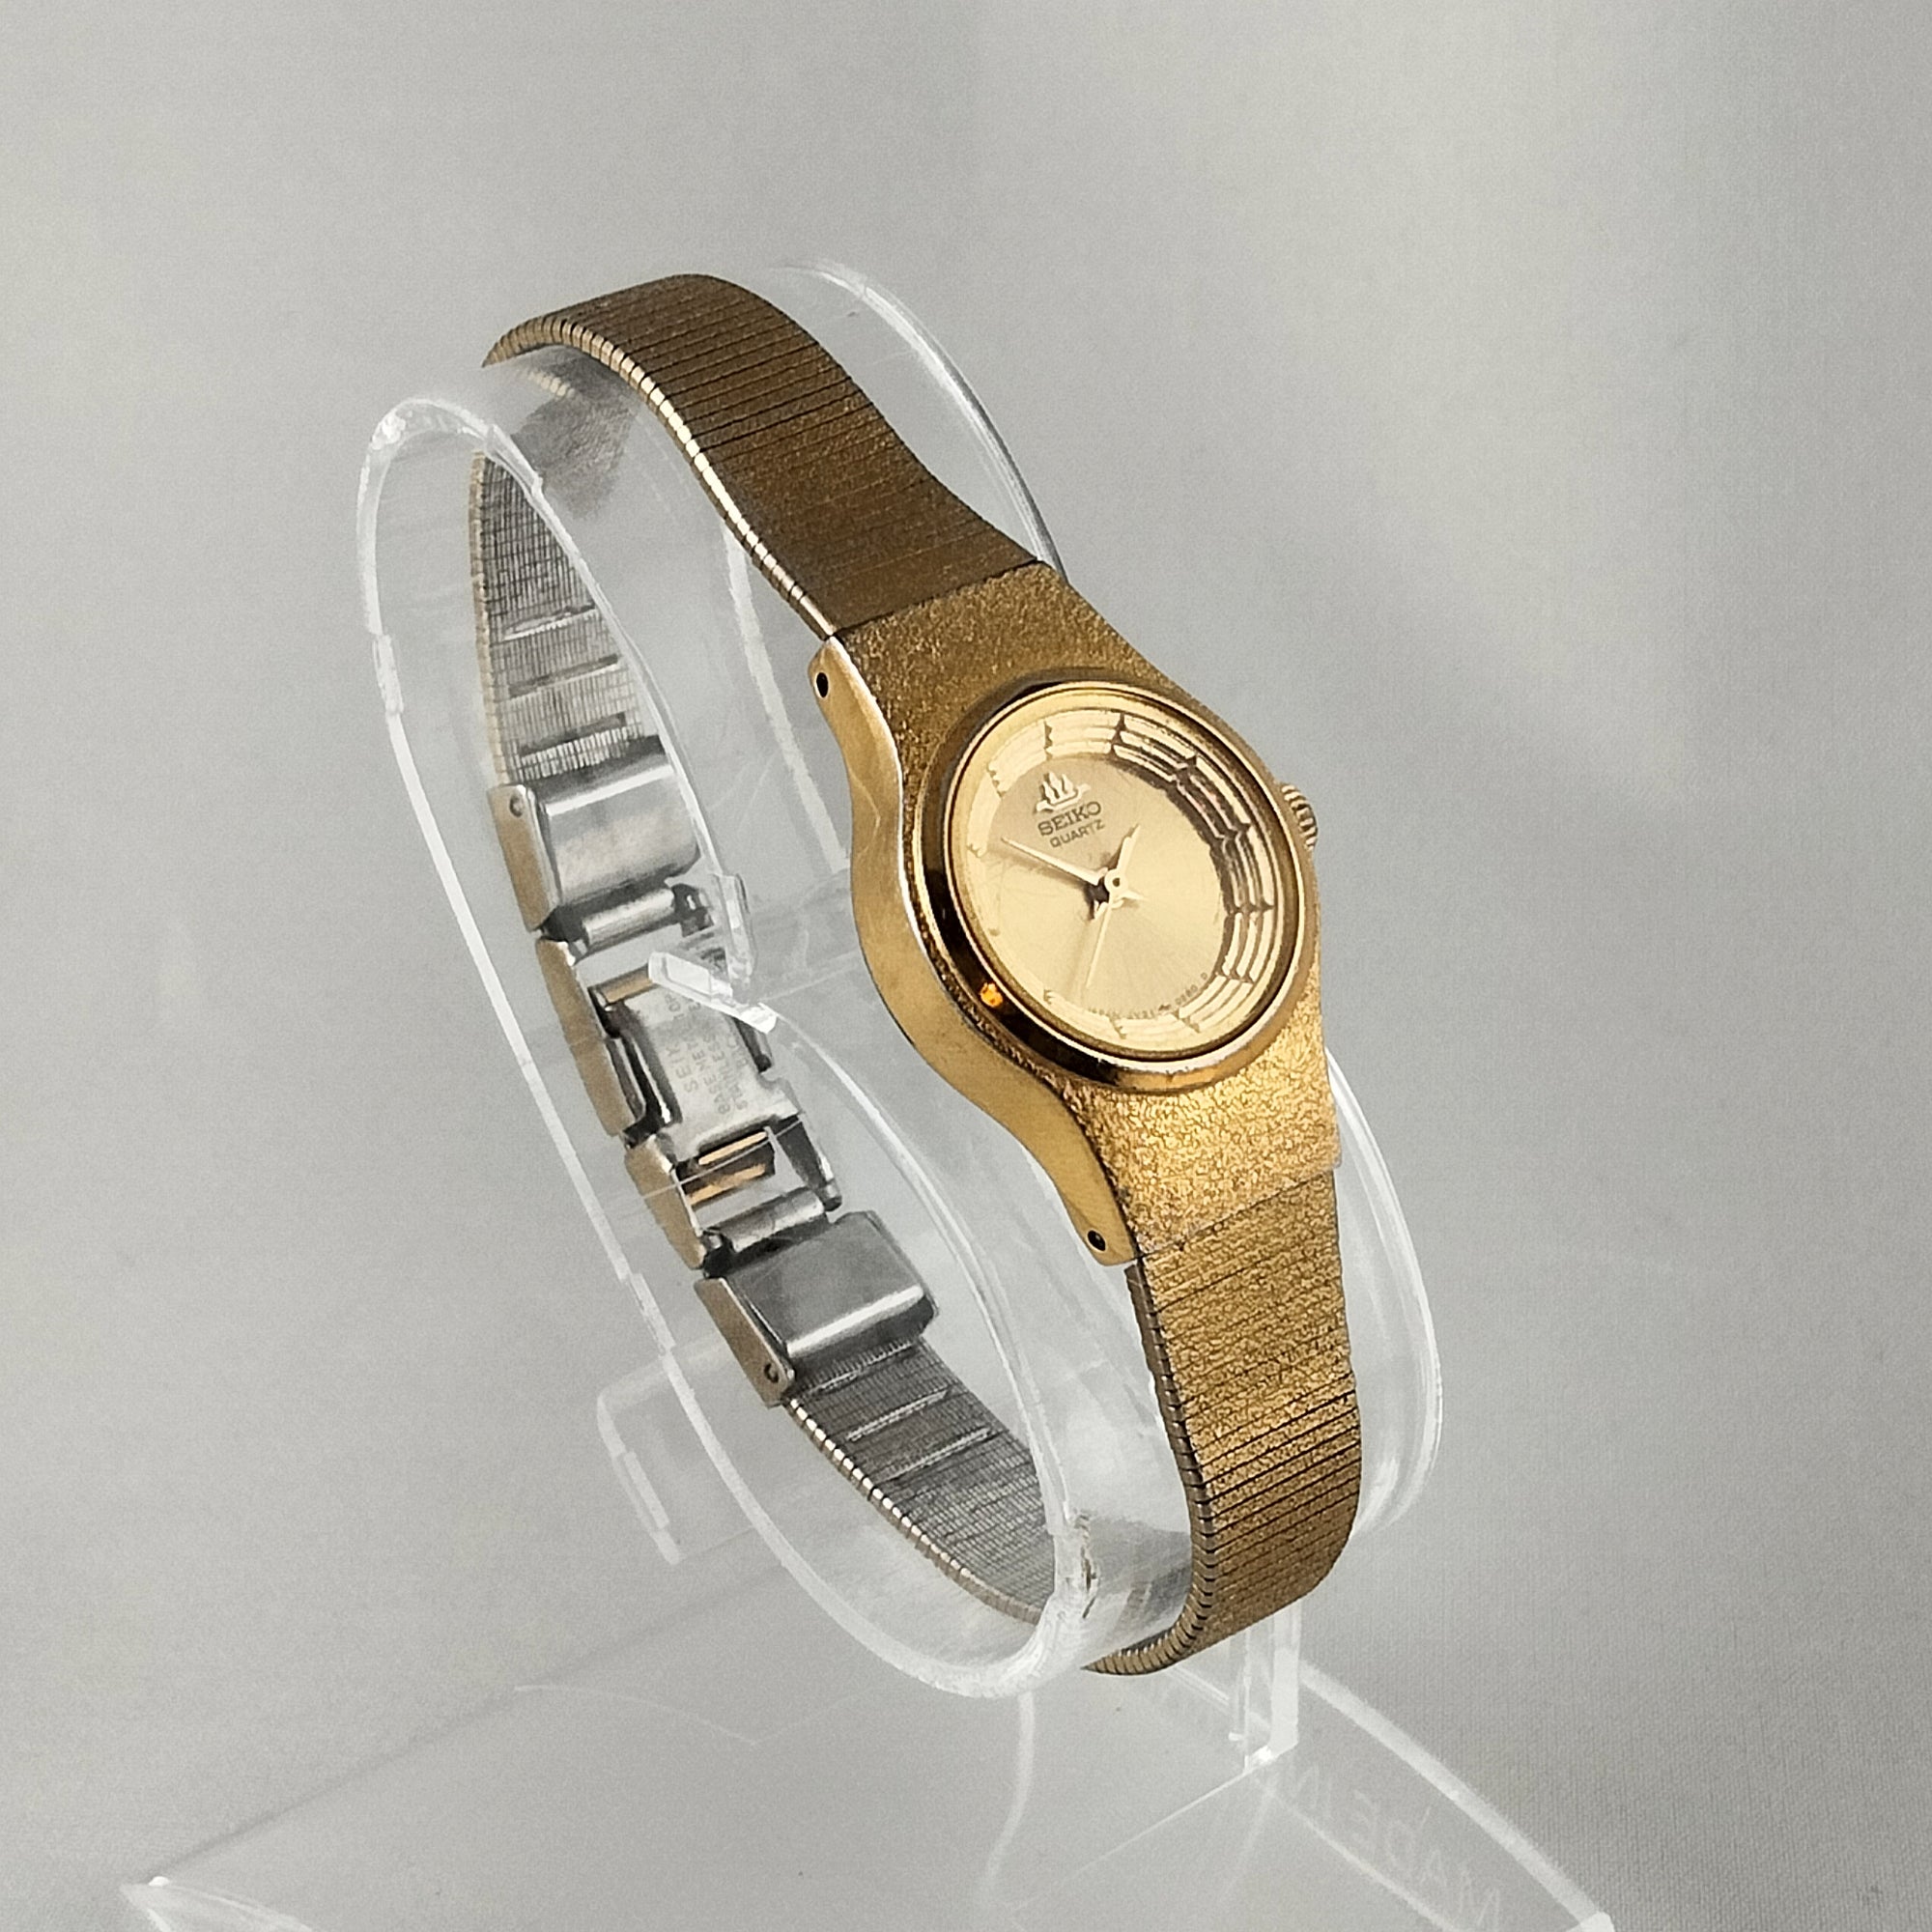 Seiko Women's Watch, Gold Tone with Raised Details on Dial